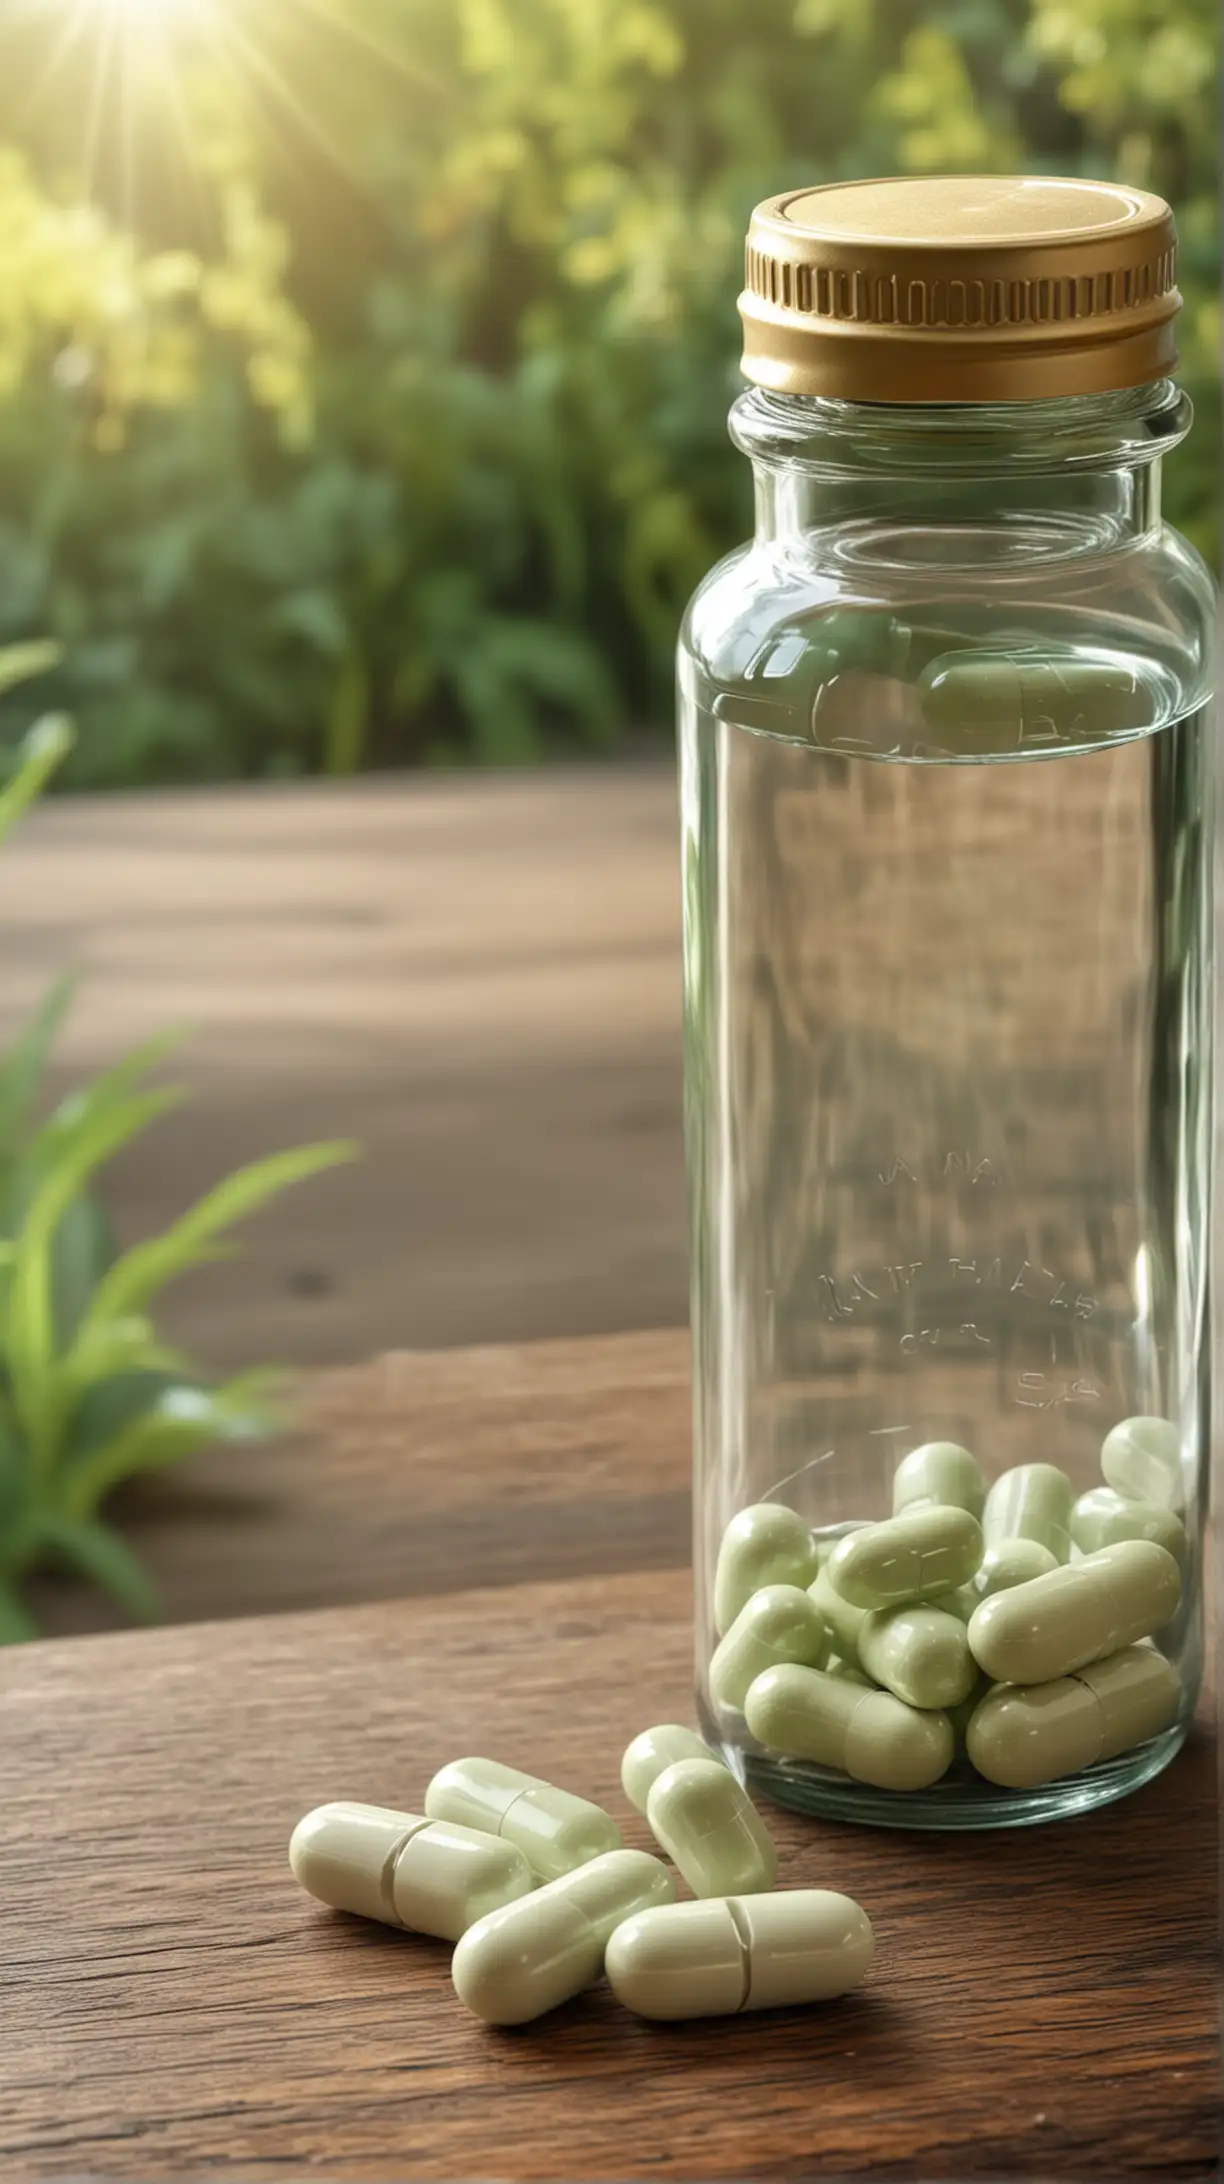 Supplement Pills on Table with Unlabeled Medicine Bottle and Reseda Luteola Plantation Background in HyperRealistic 4K HDR